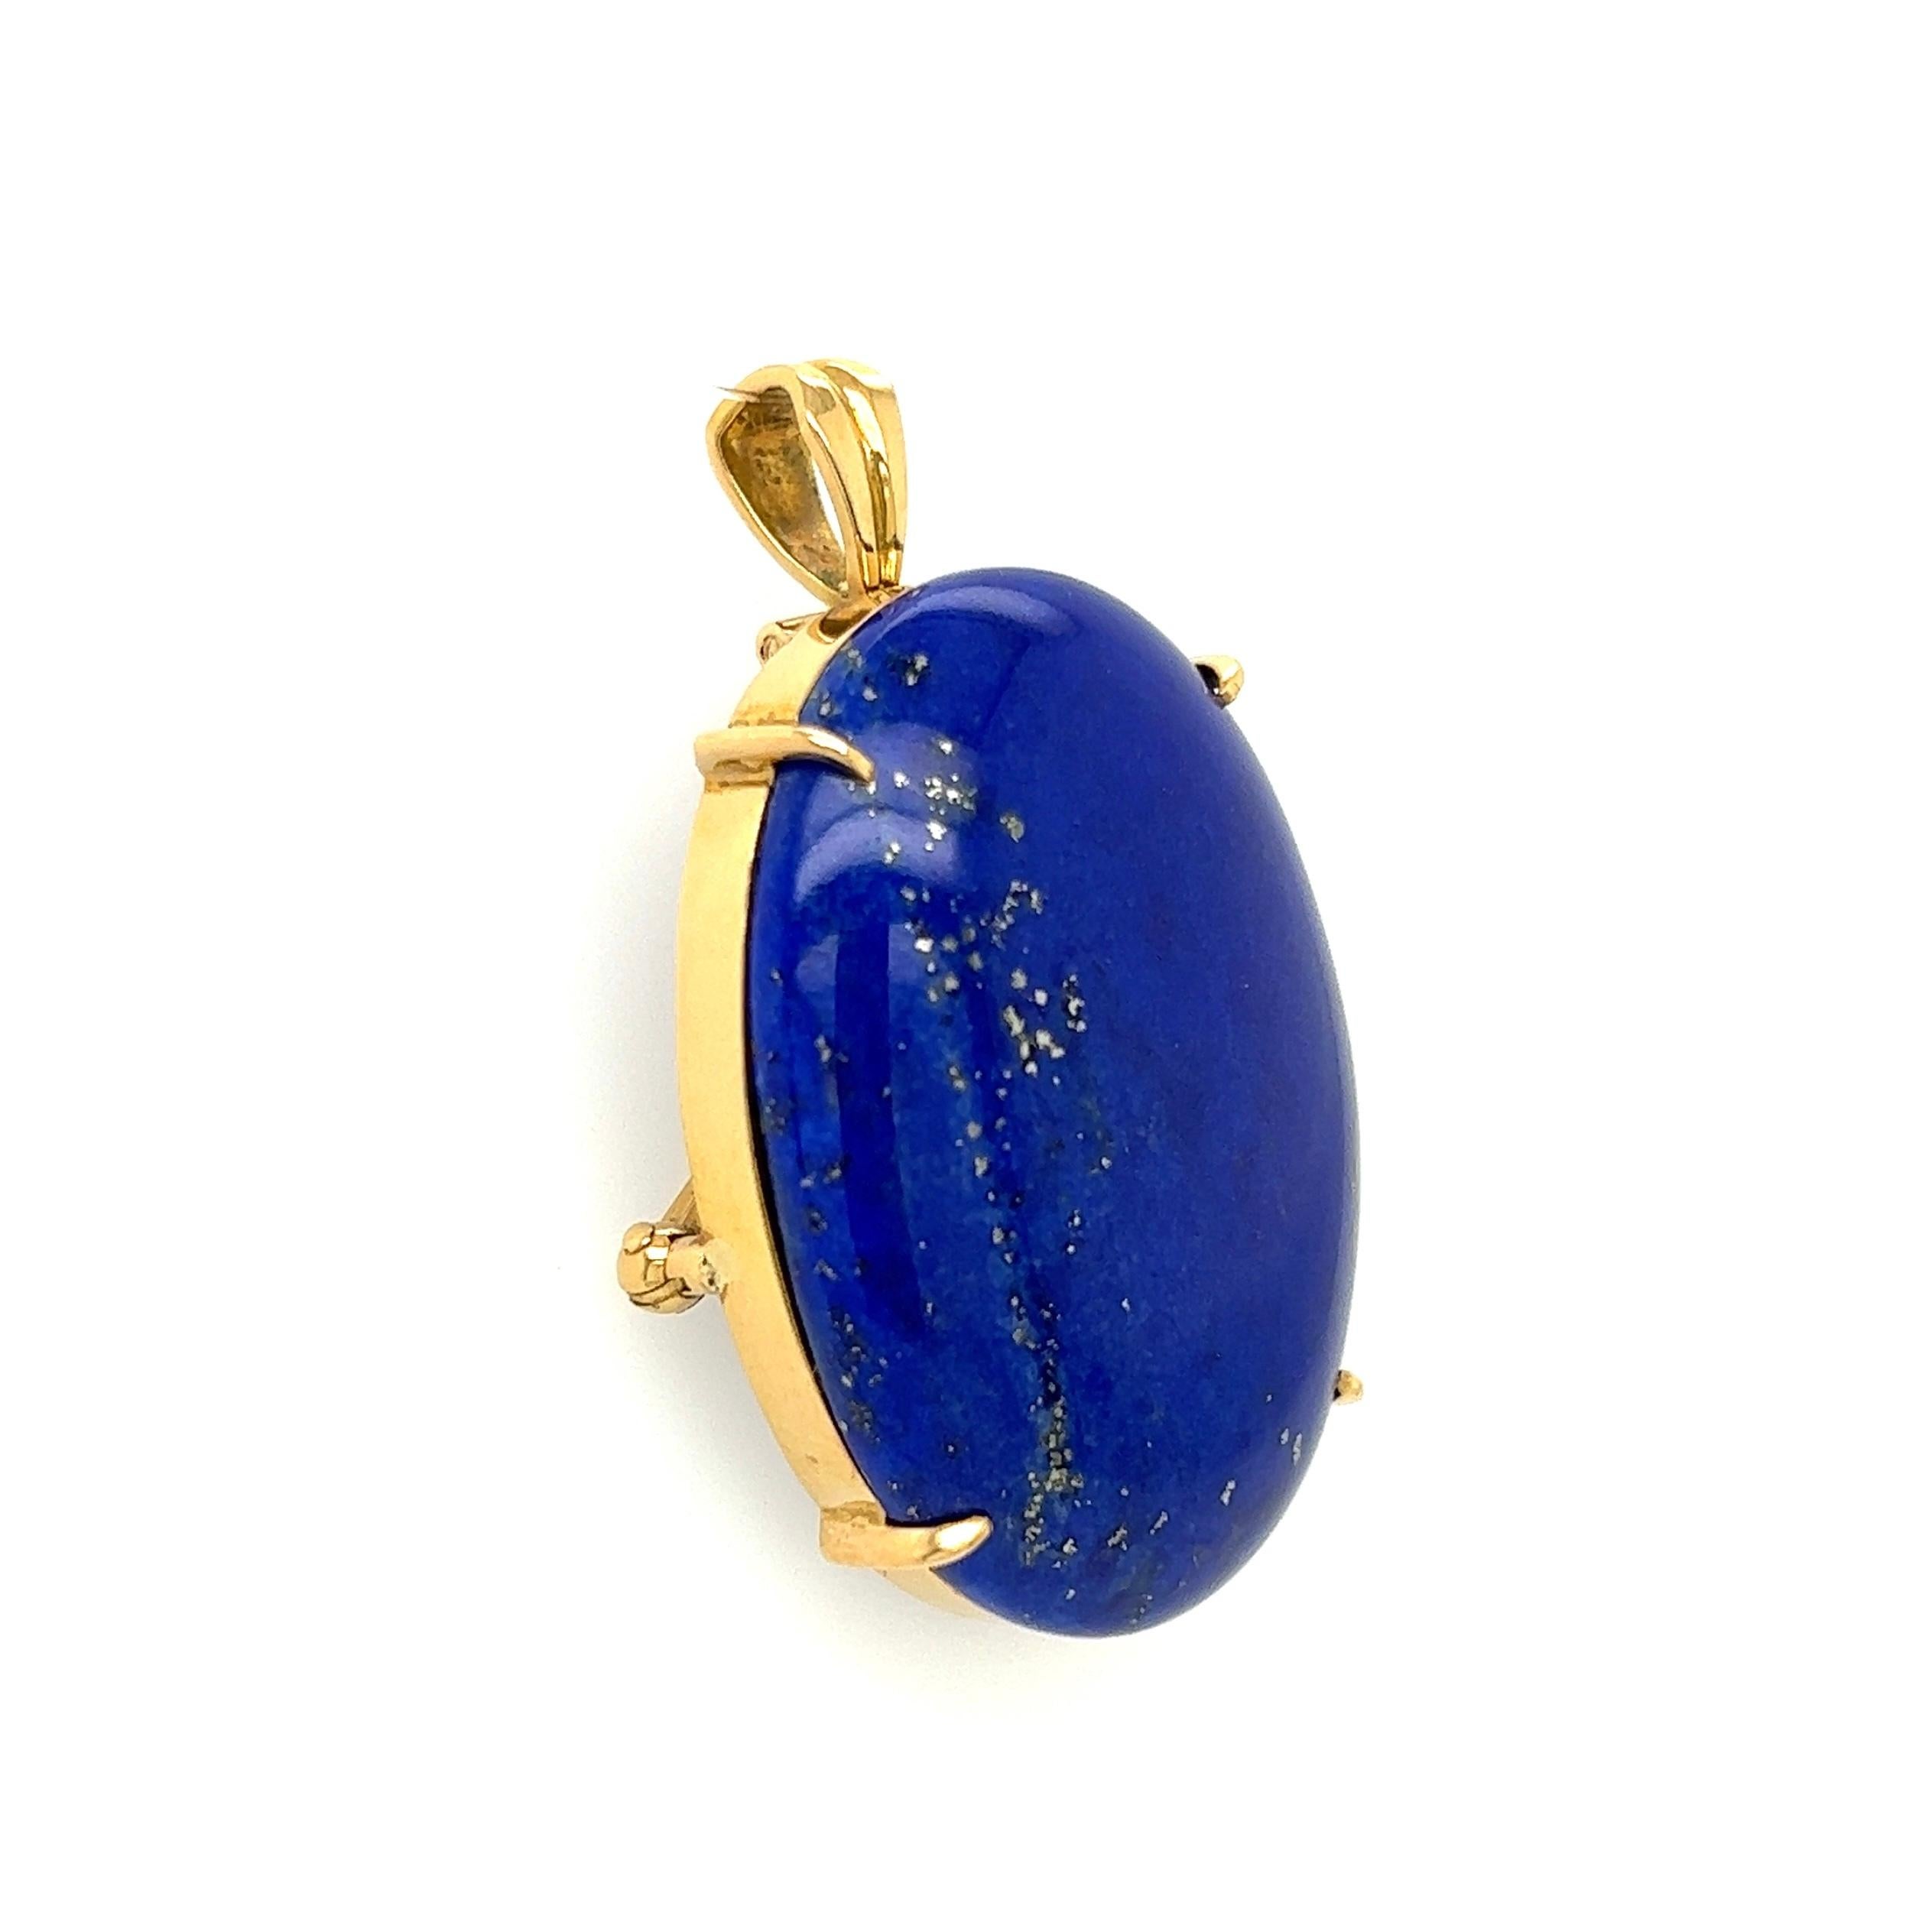 Oval Cut Large Oval Lapis Lazuli w/Pyrite Gold Pendant Brooch For Sale